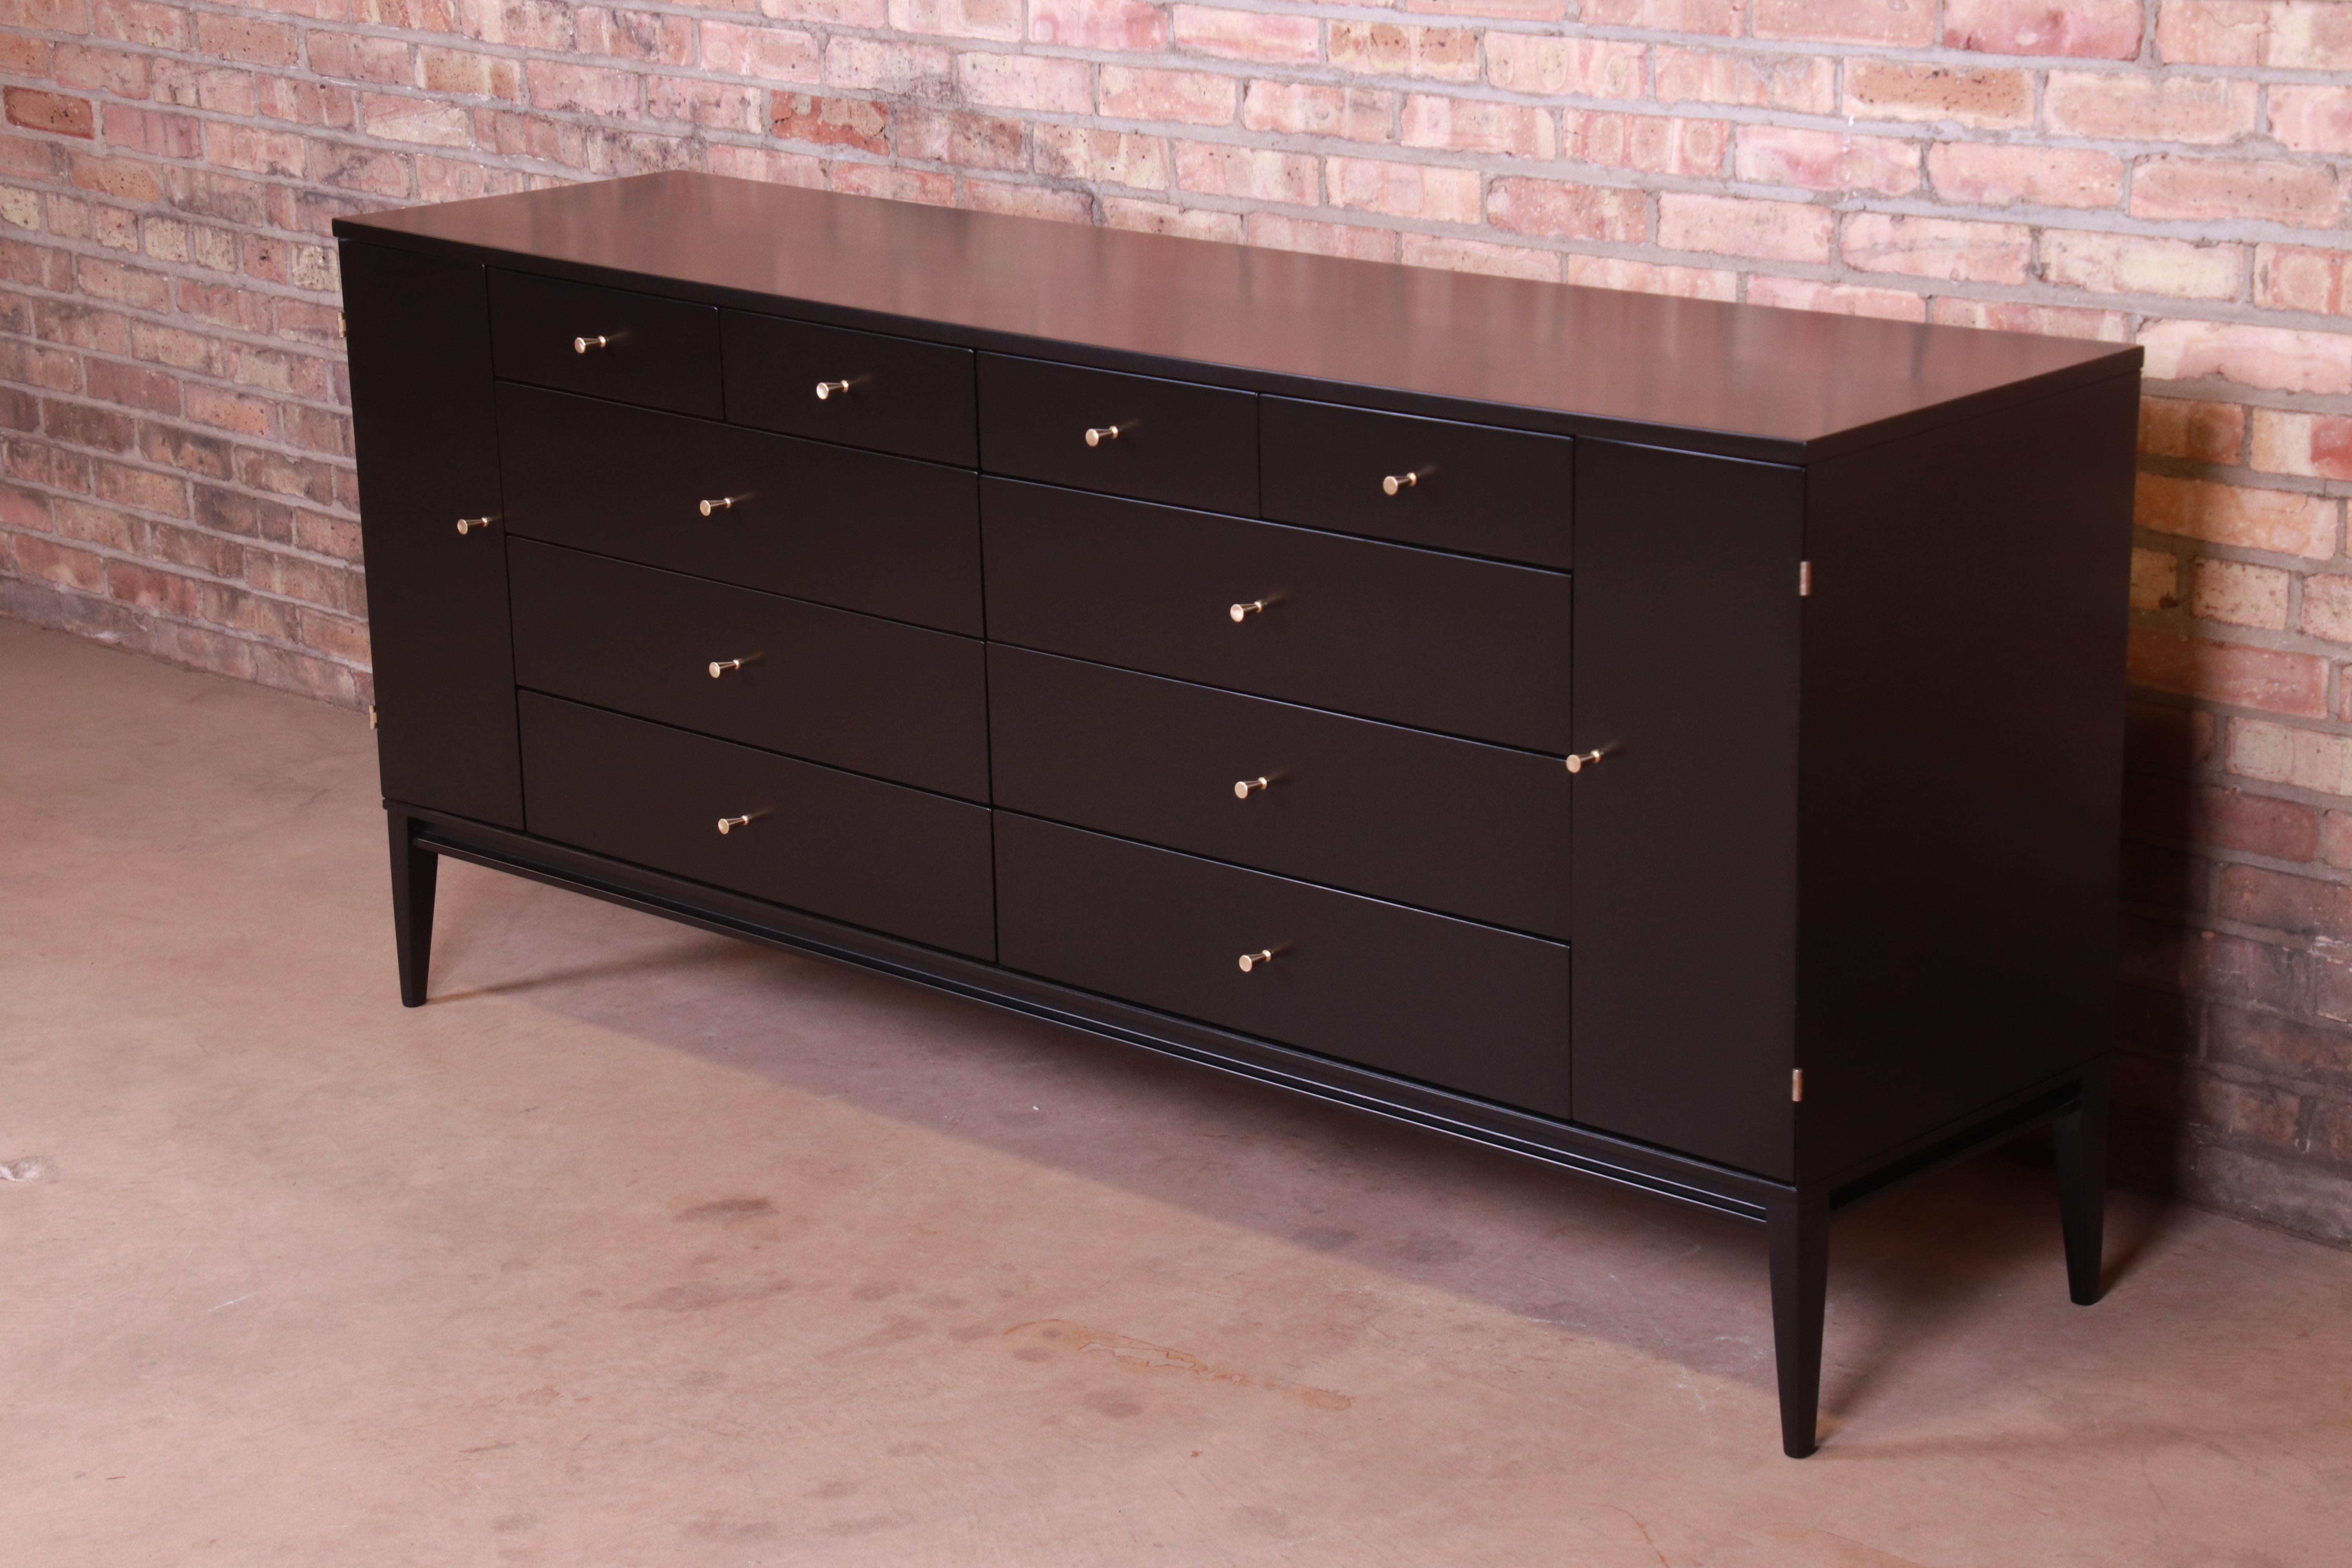 American Paul McCobb Planner Group 20-Drawer Dresser or Credenza, Newly Restored